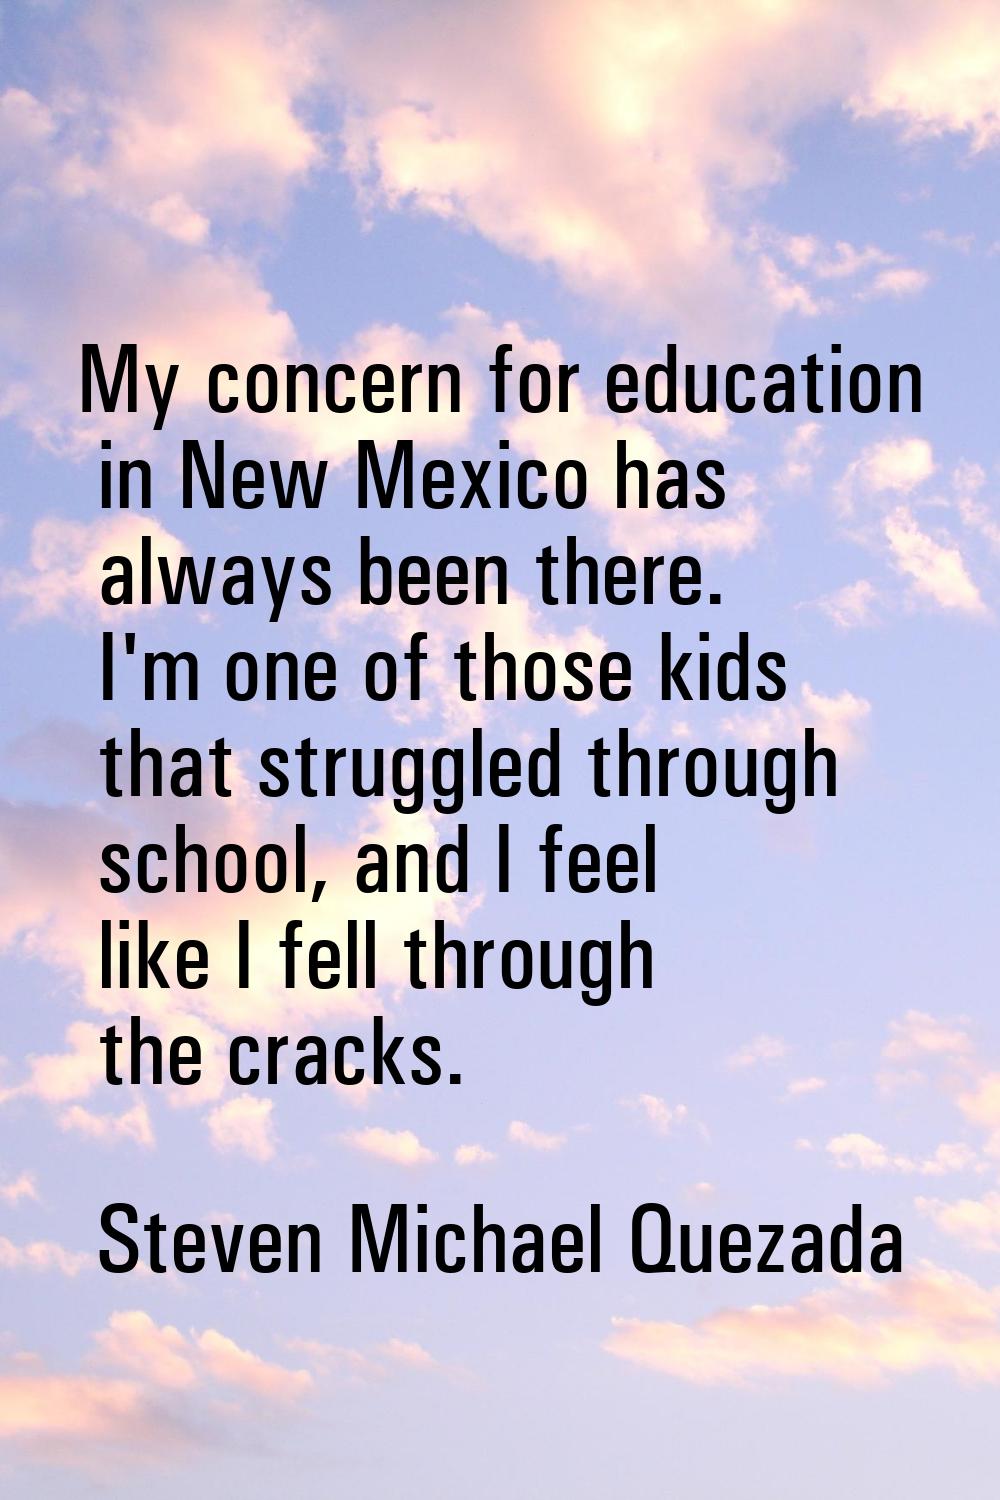 My concern for education in New Mexico has always been there. I'm one of those kids that struggled 